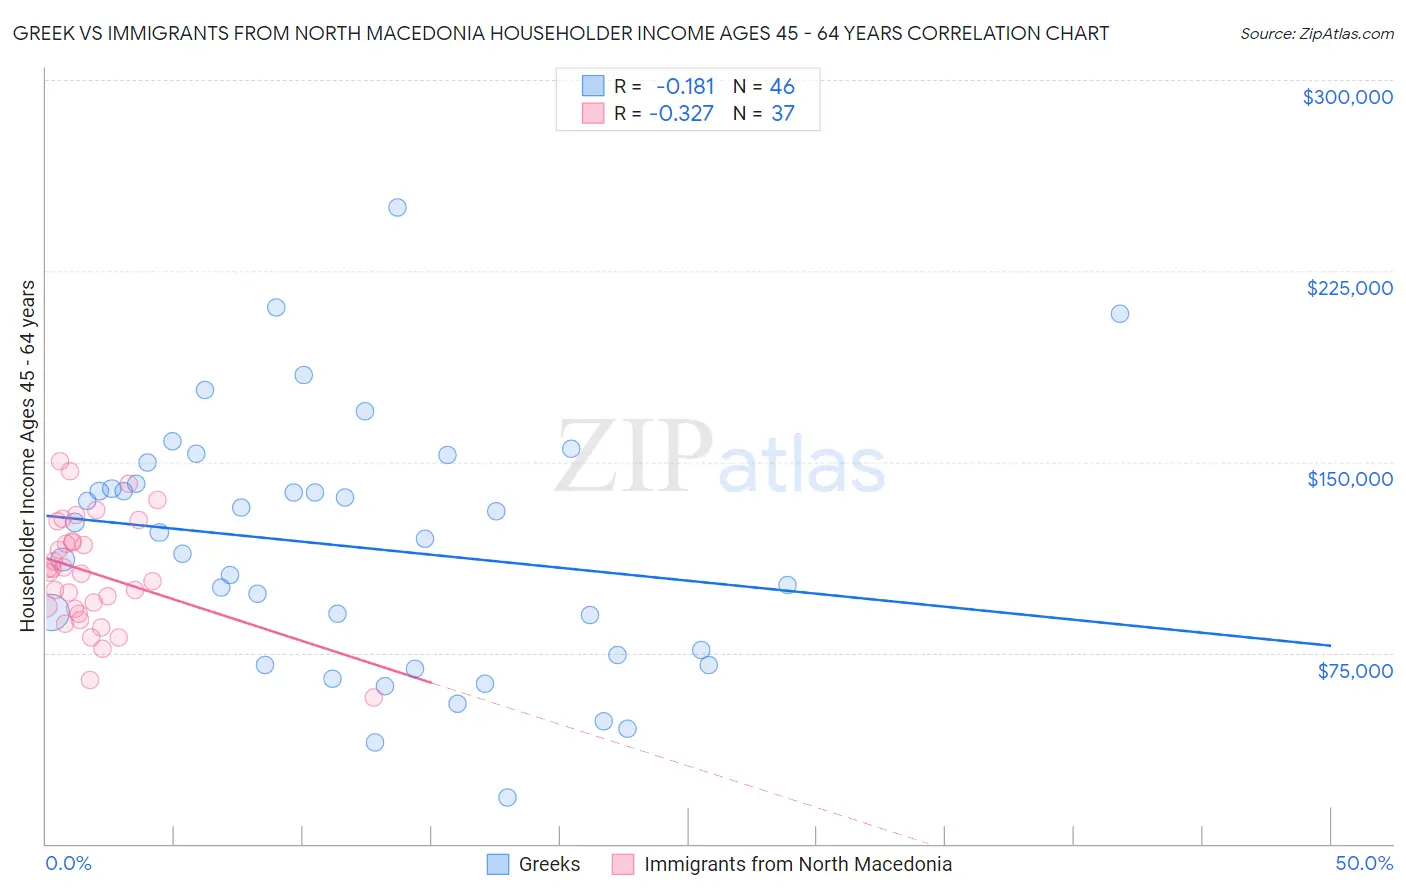 Greek vs Immigrants from North Macedonia Householder Income Ages 45 - 64 years